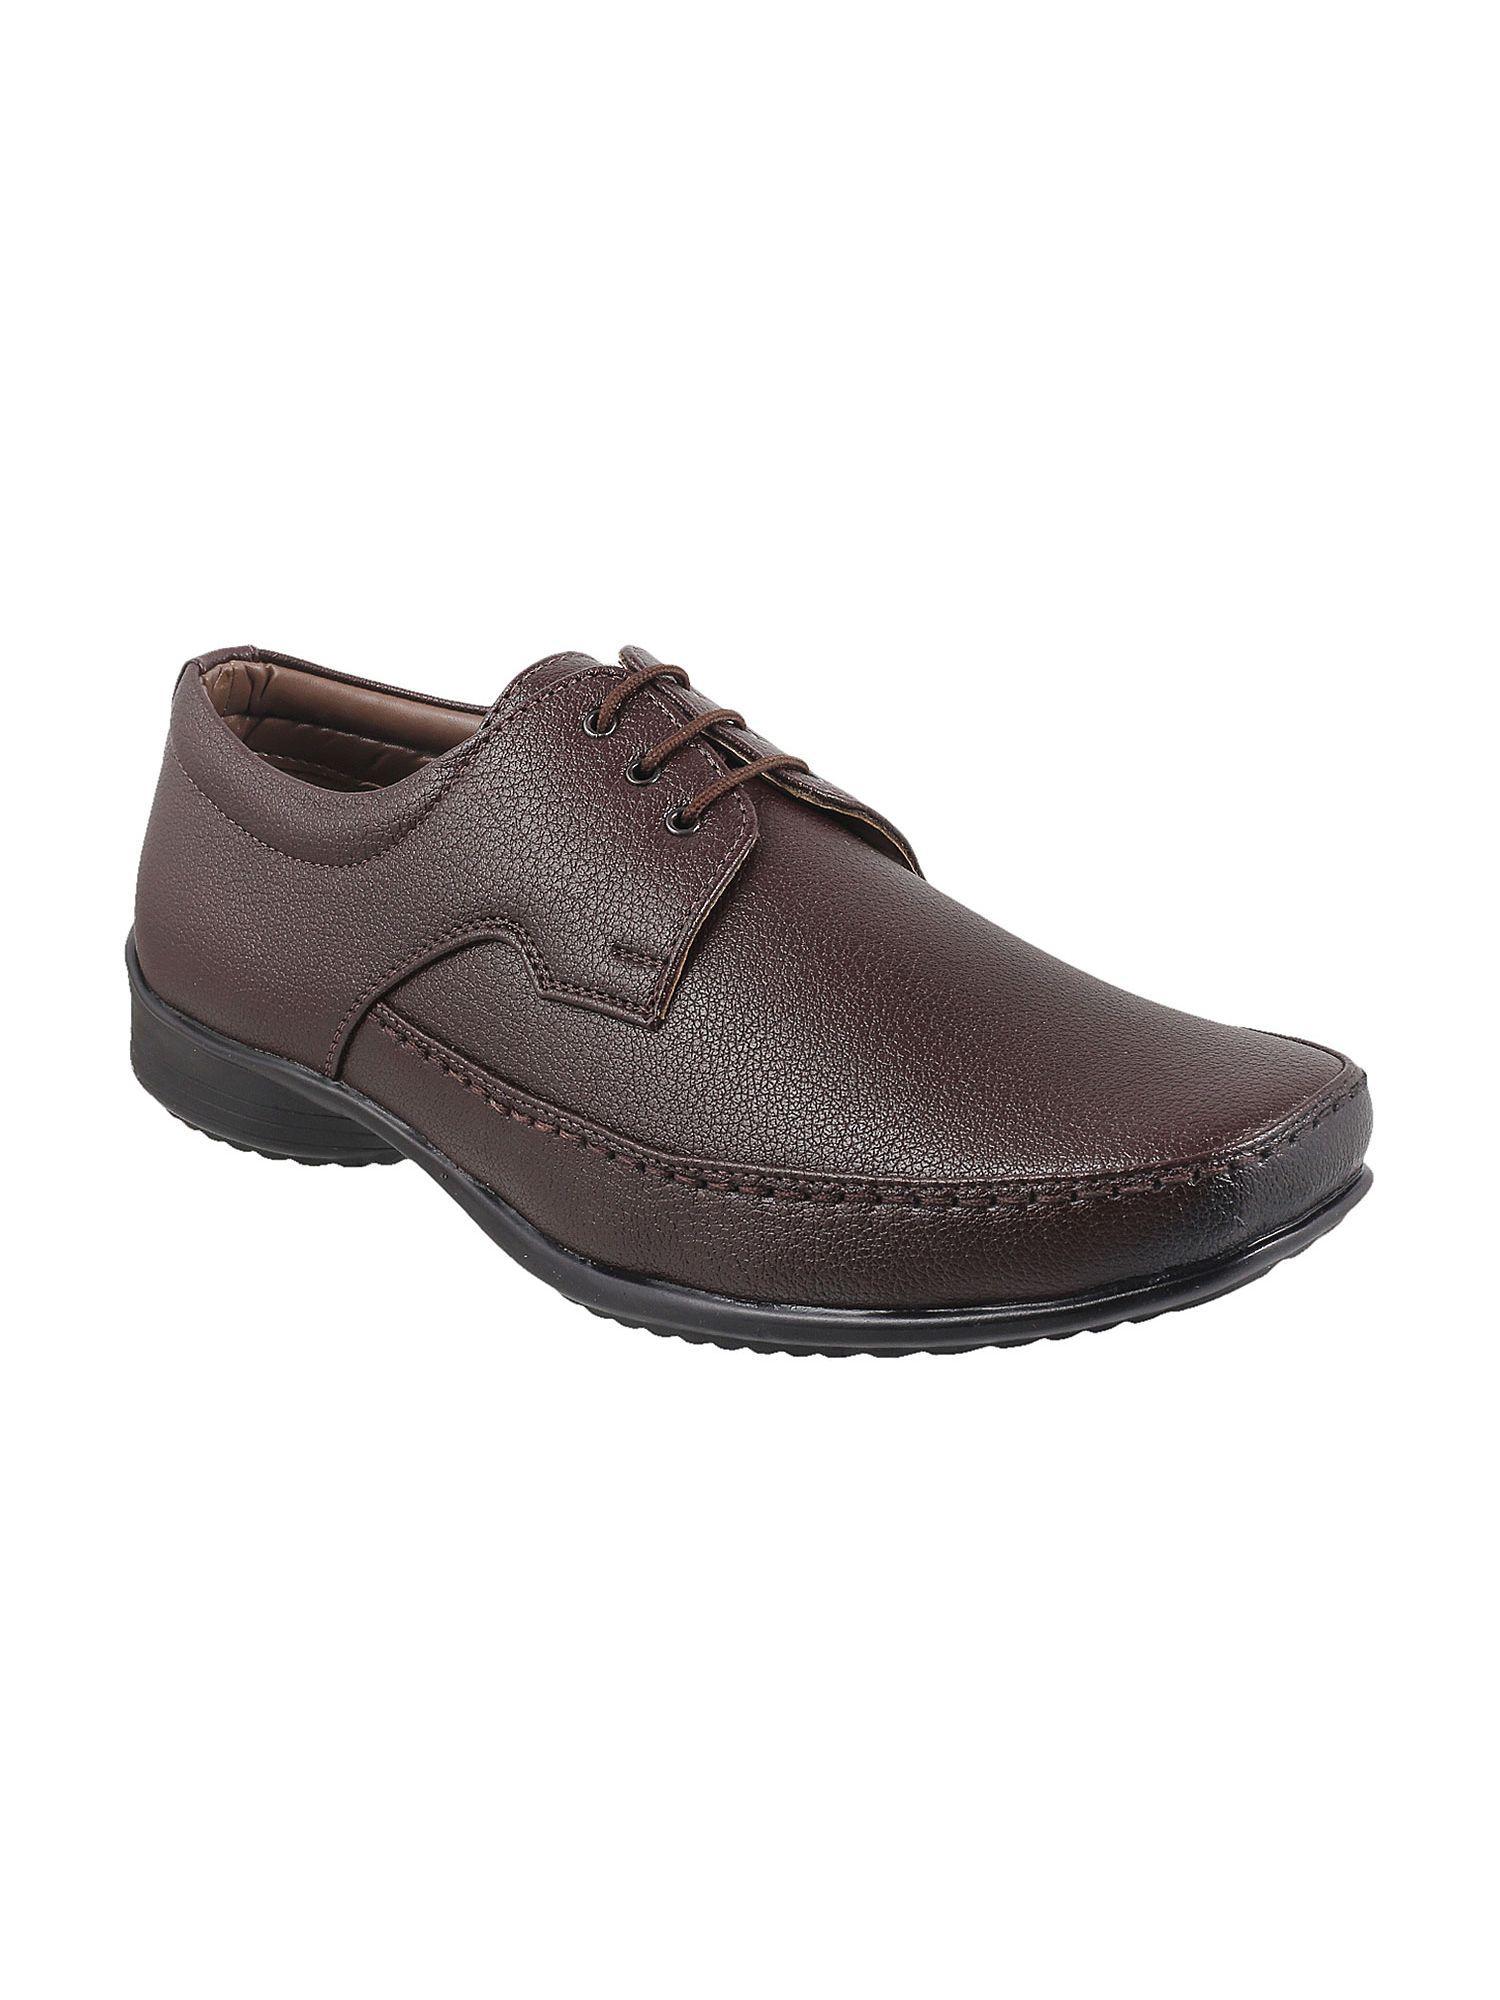 brown solid oxfords